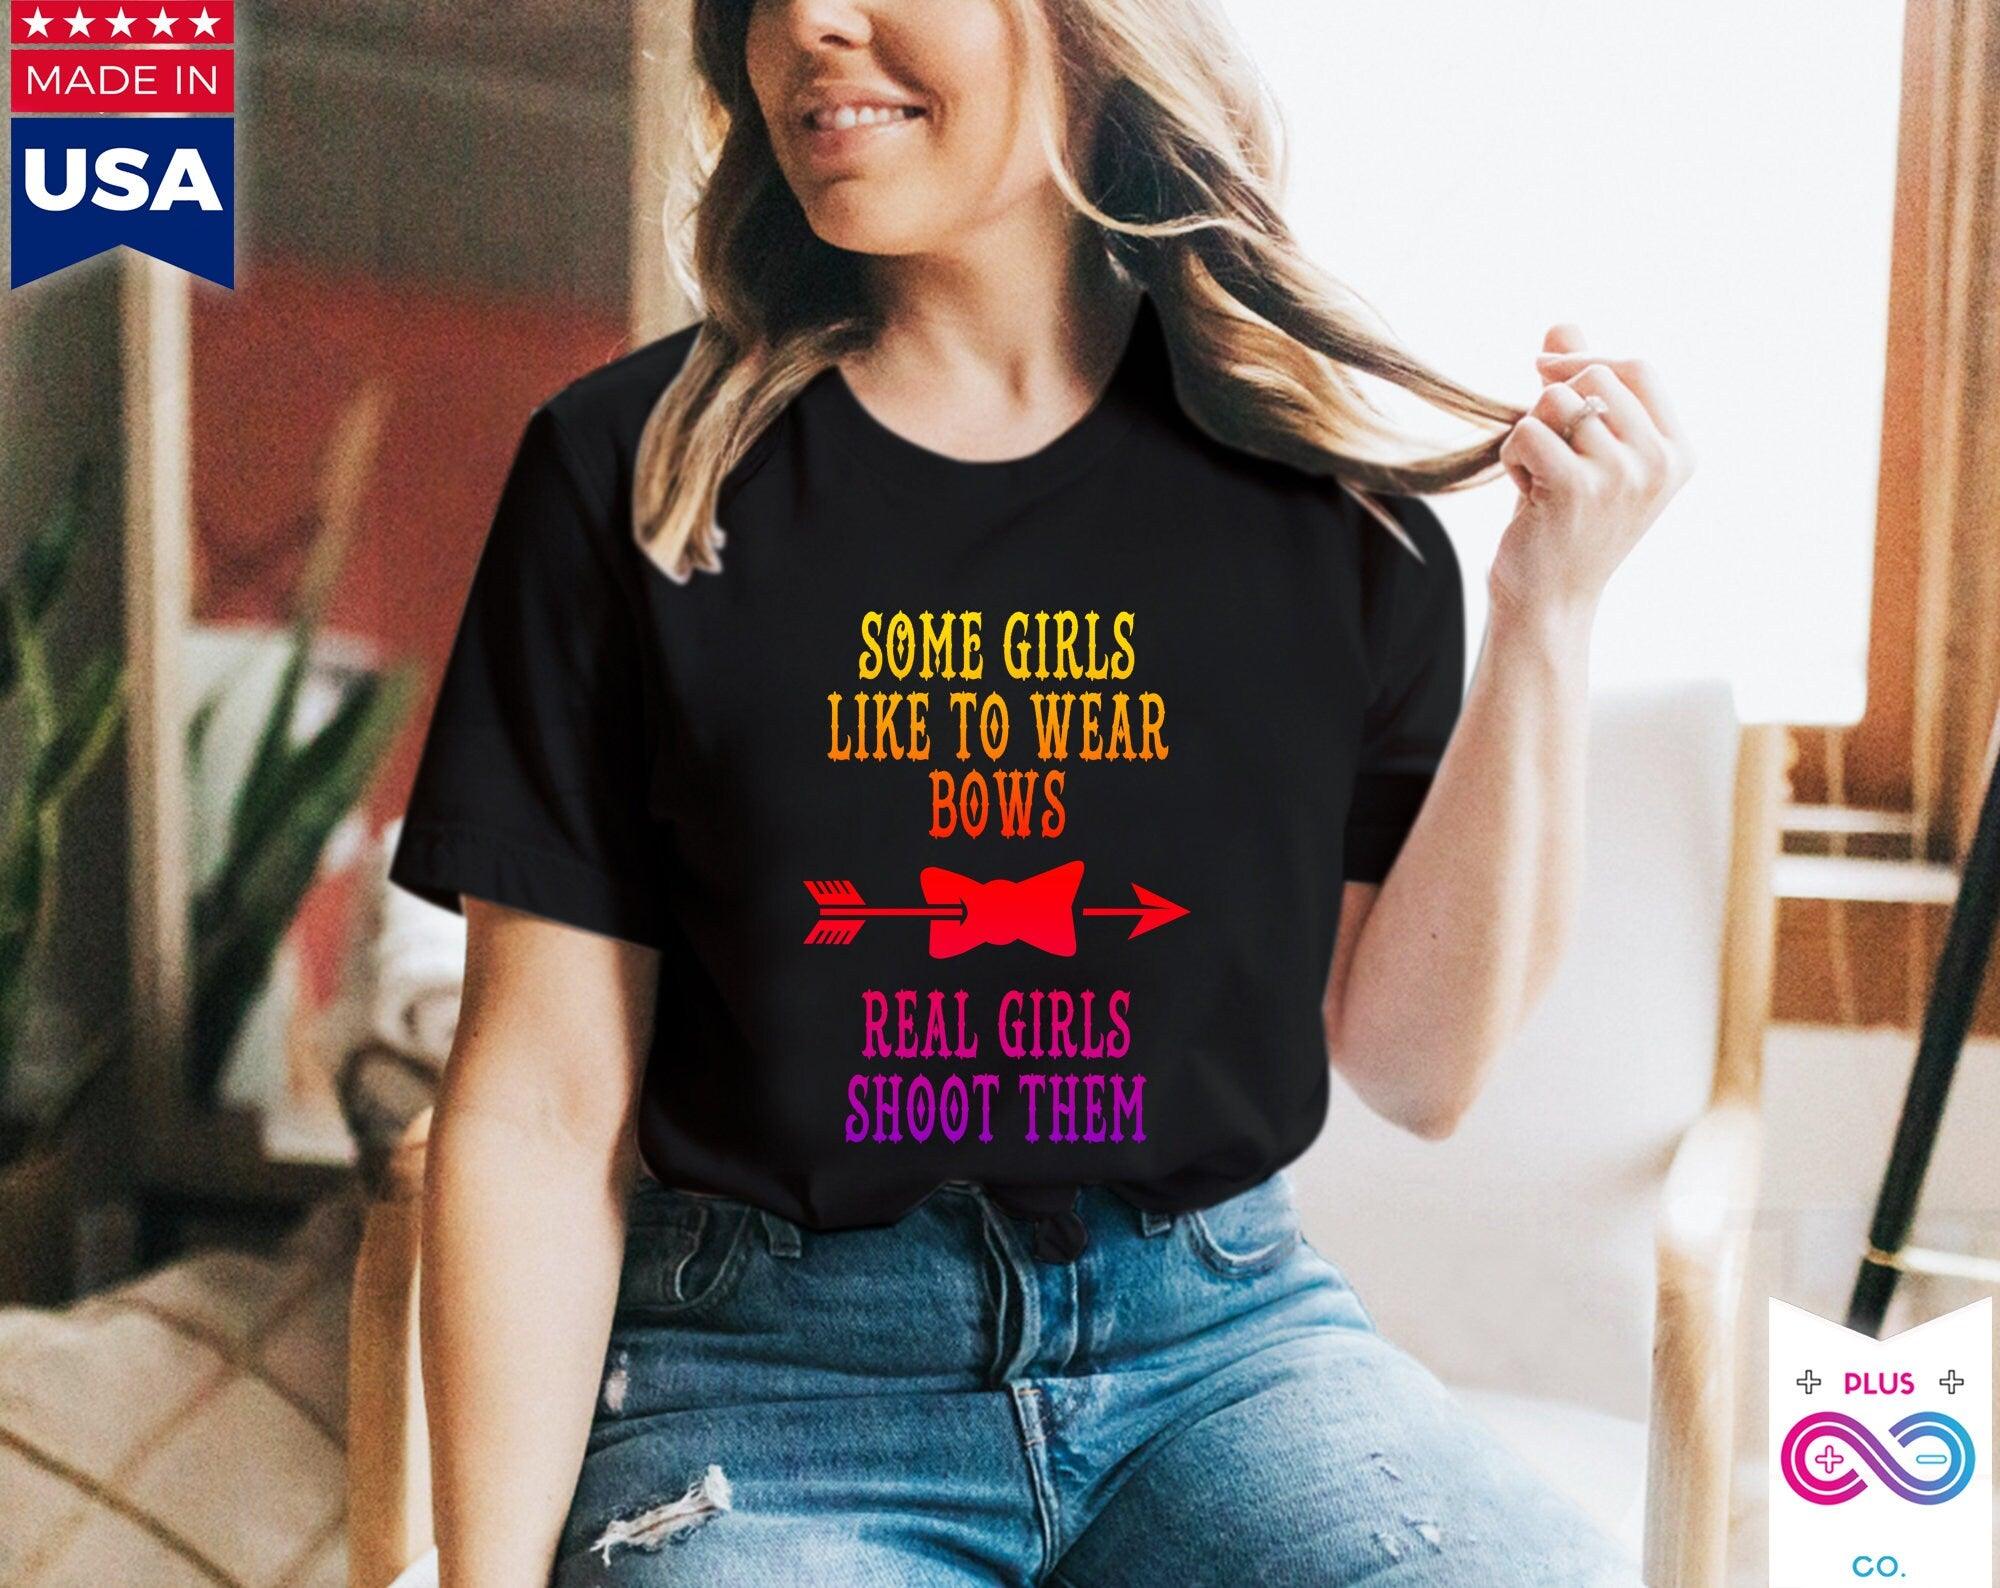 Some Girls Like To Wear Bows Real Girls Shoot Them T-Shirts, Archery gift for girls, Girl Archer Shirt - I Shoot Bows - Bow & Arrow - plusminusco.com